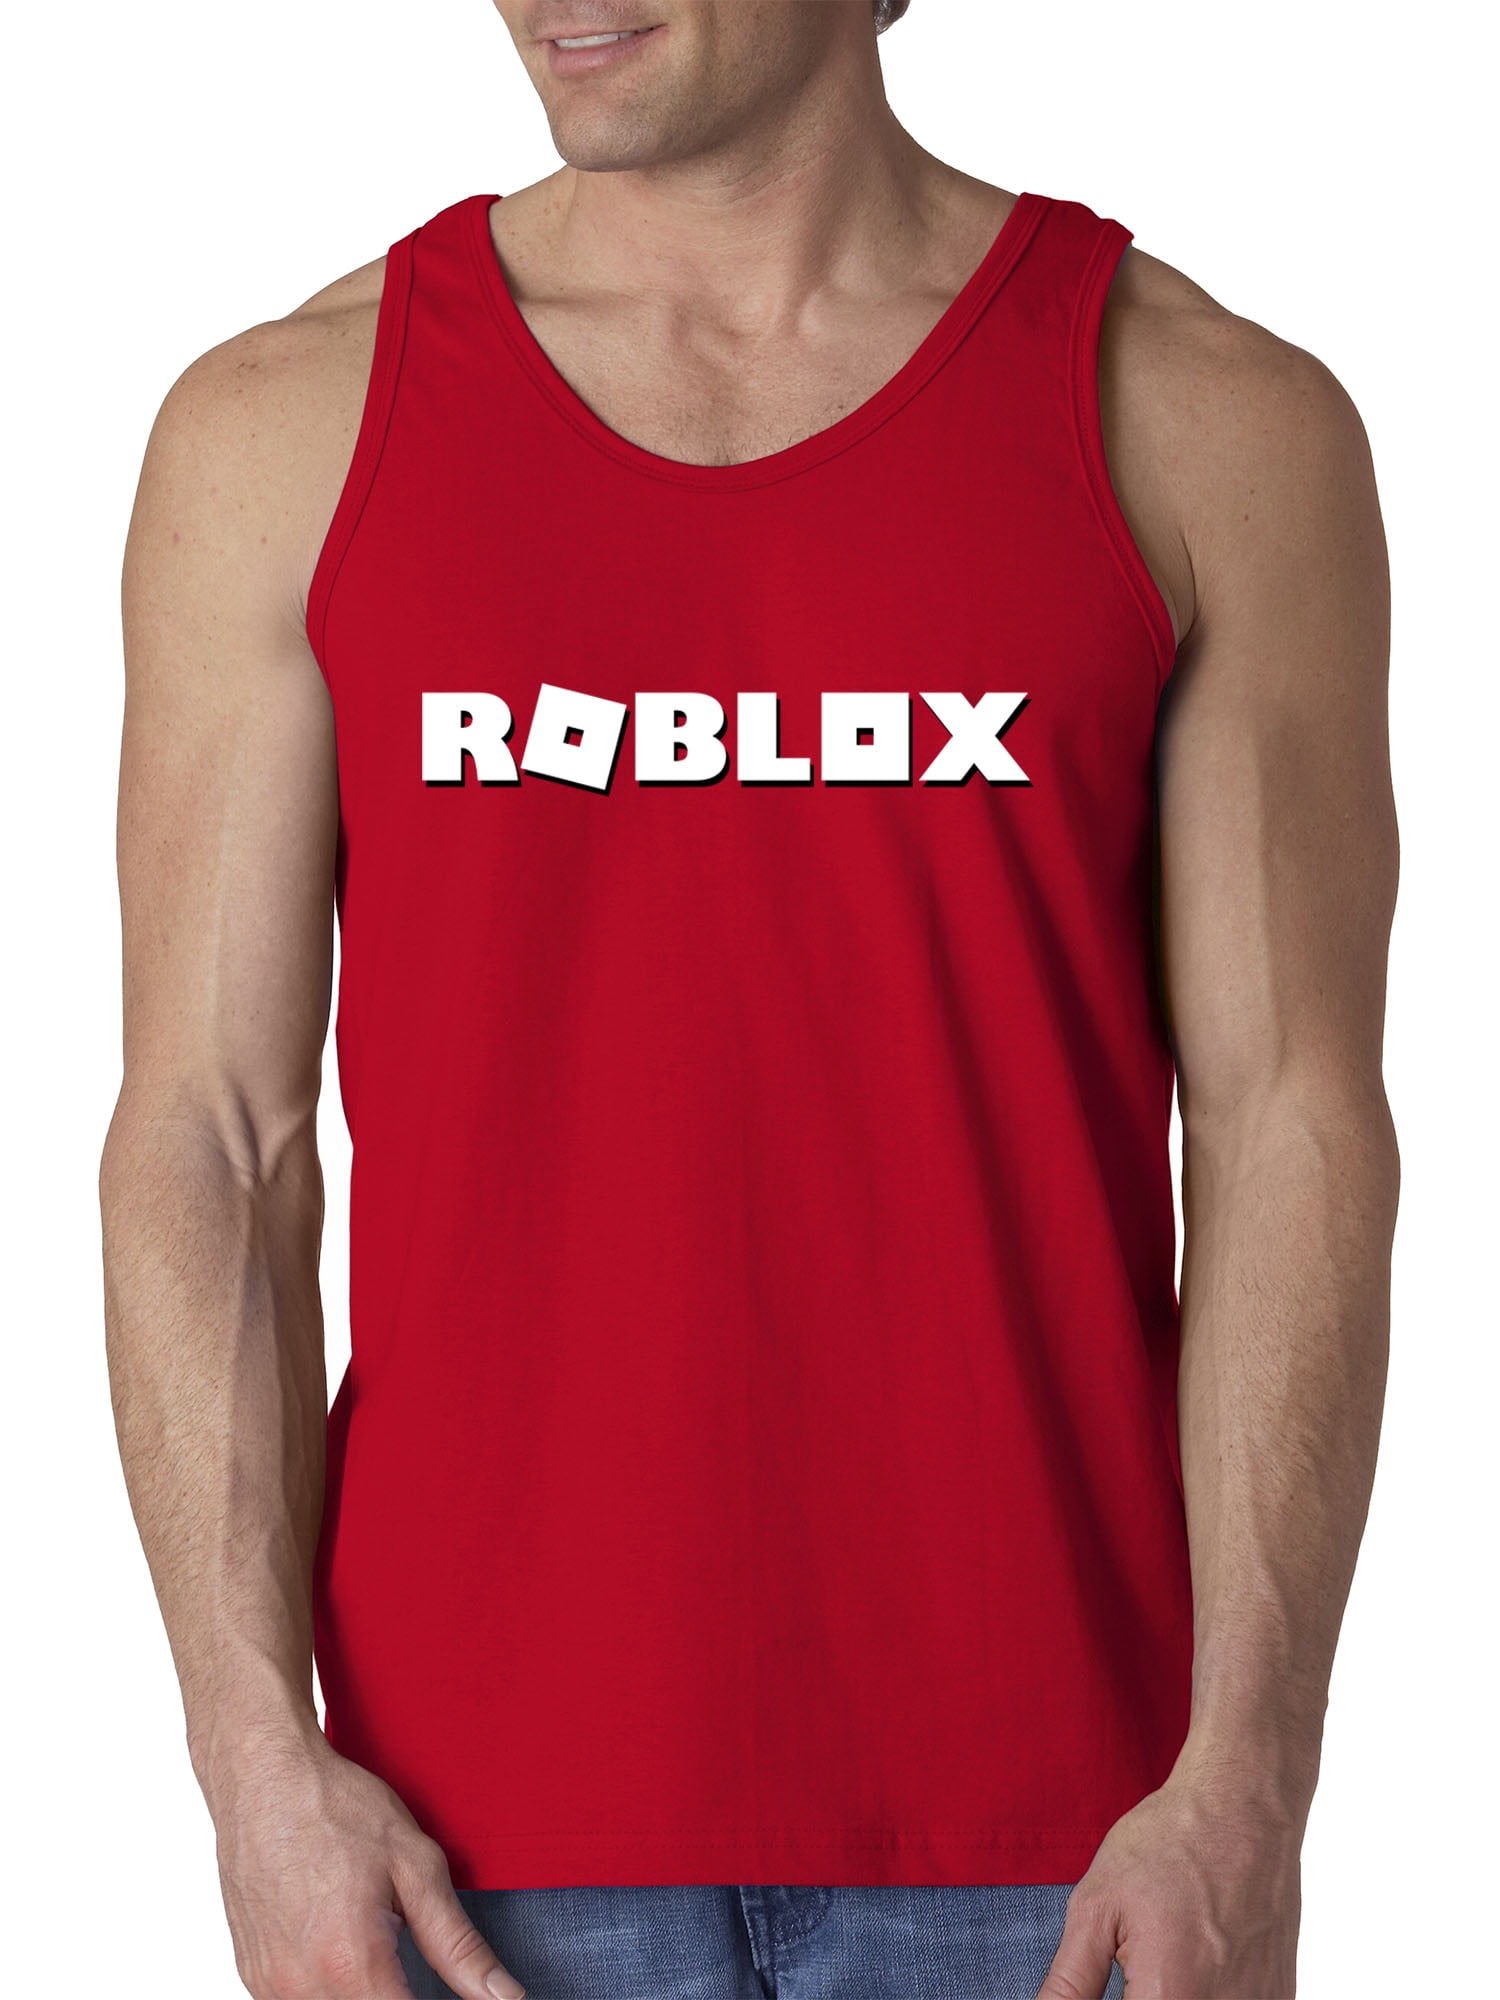 New Way 923 Men S Tank Top Roblox Logo Game Accent Xl Red - red vest roblox shirt